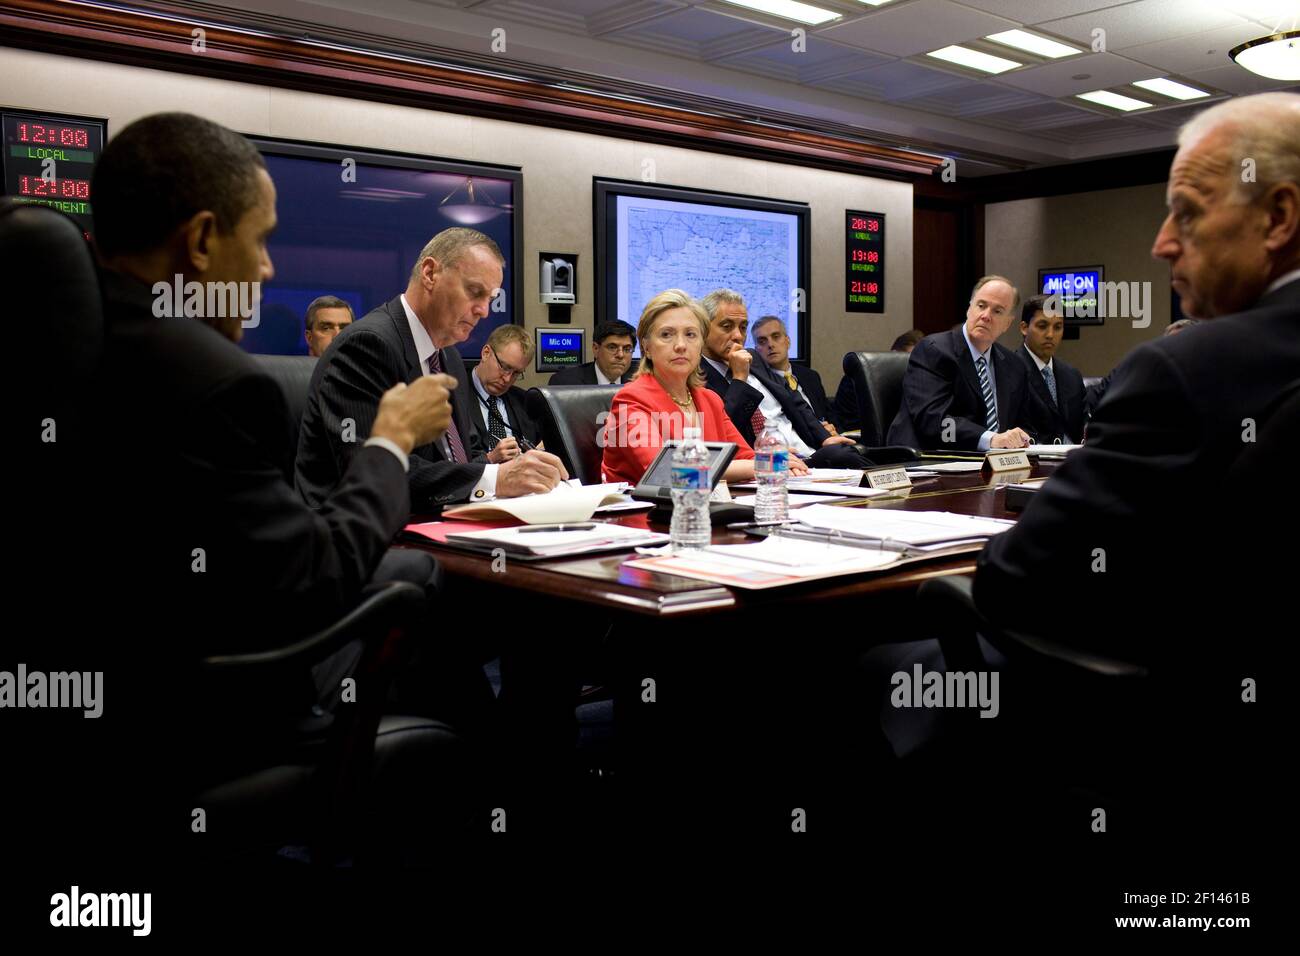 President Barack Obama speaks, during a meeting on Afghanistan and Pakistan, in the Situation Room of the White House, April 16, 2010. Listening at the table, from left, are General James Jones, Hillary Rodham Clinton, Rahm Emanuel, Tom Donilon, Rajiv Shah, and Vice President Joe Biden Stock Photo